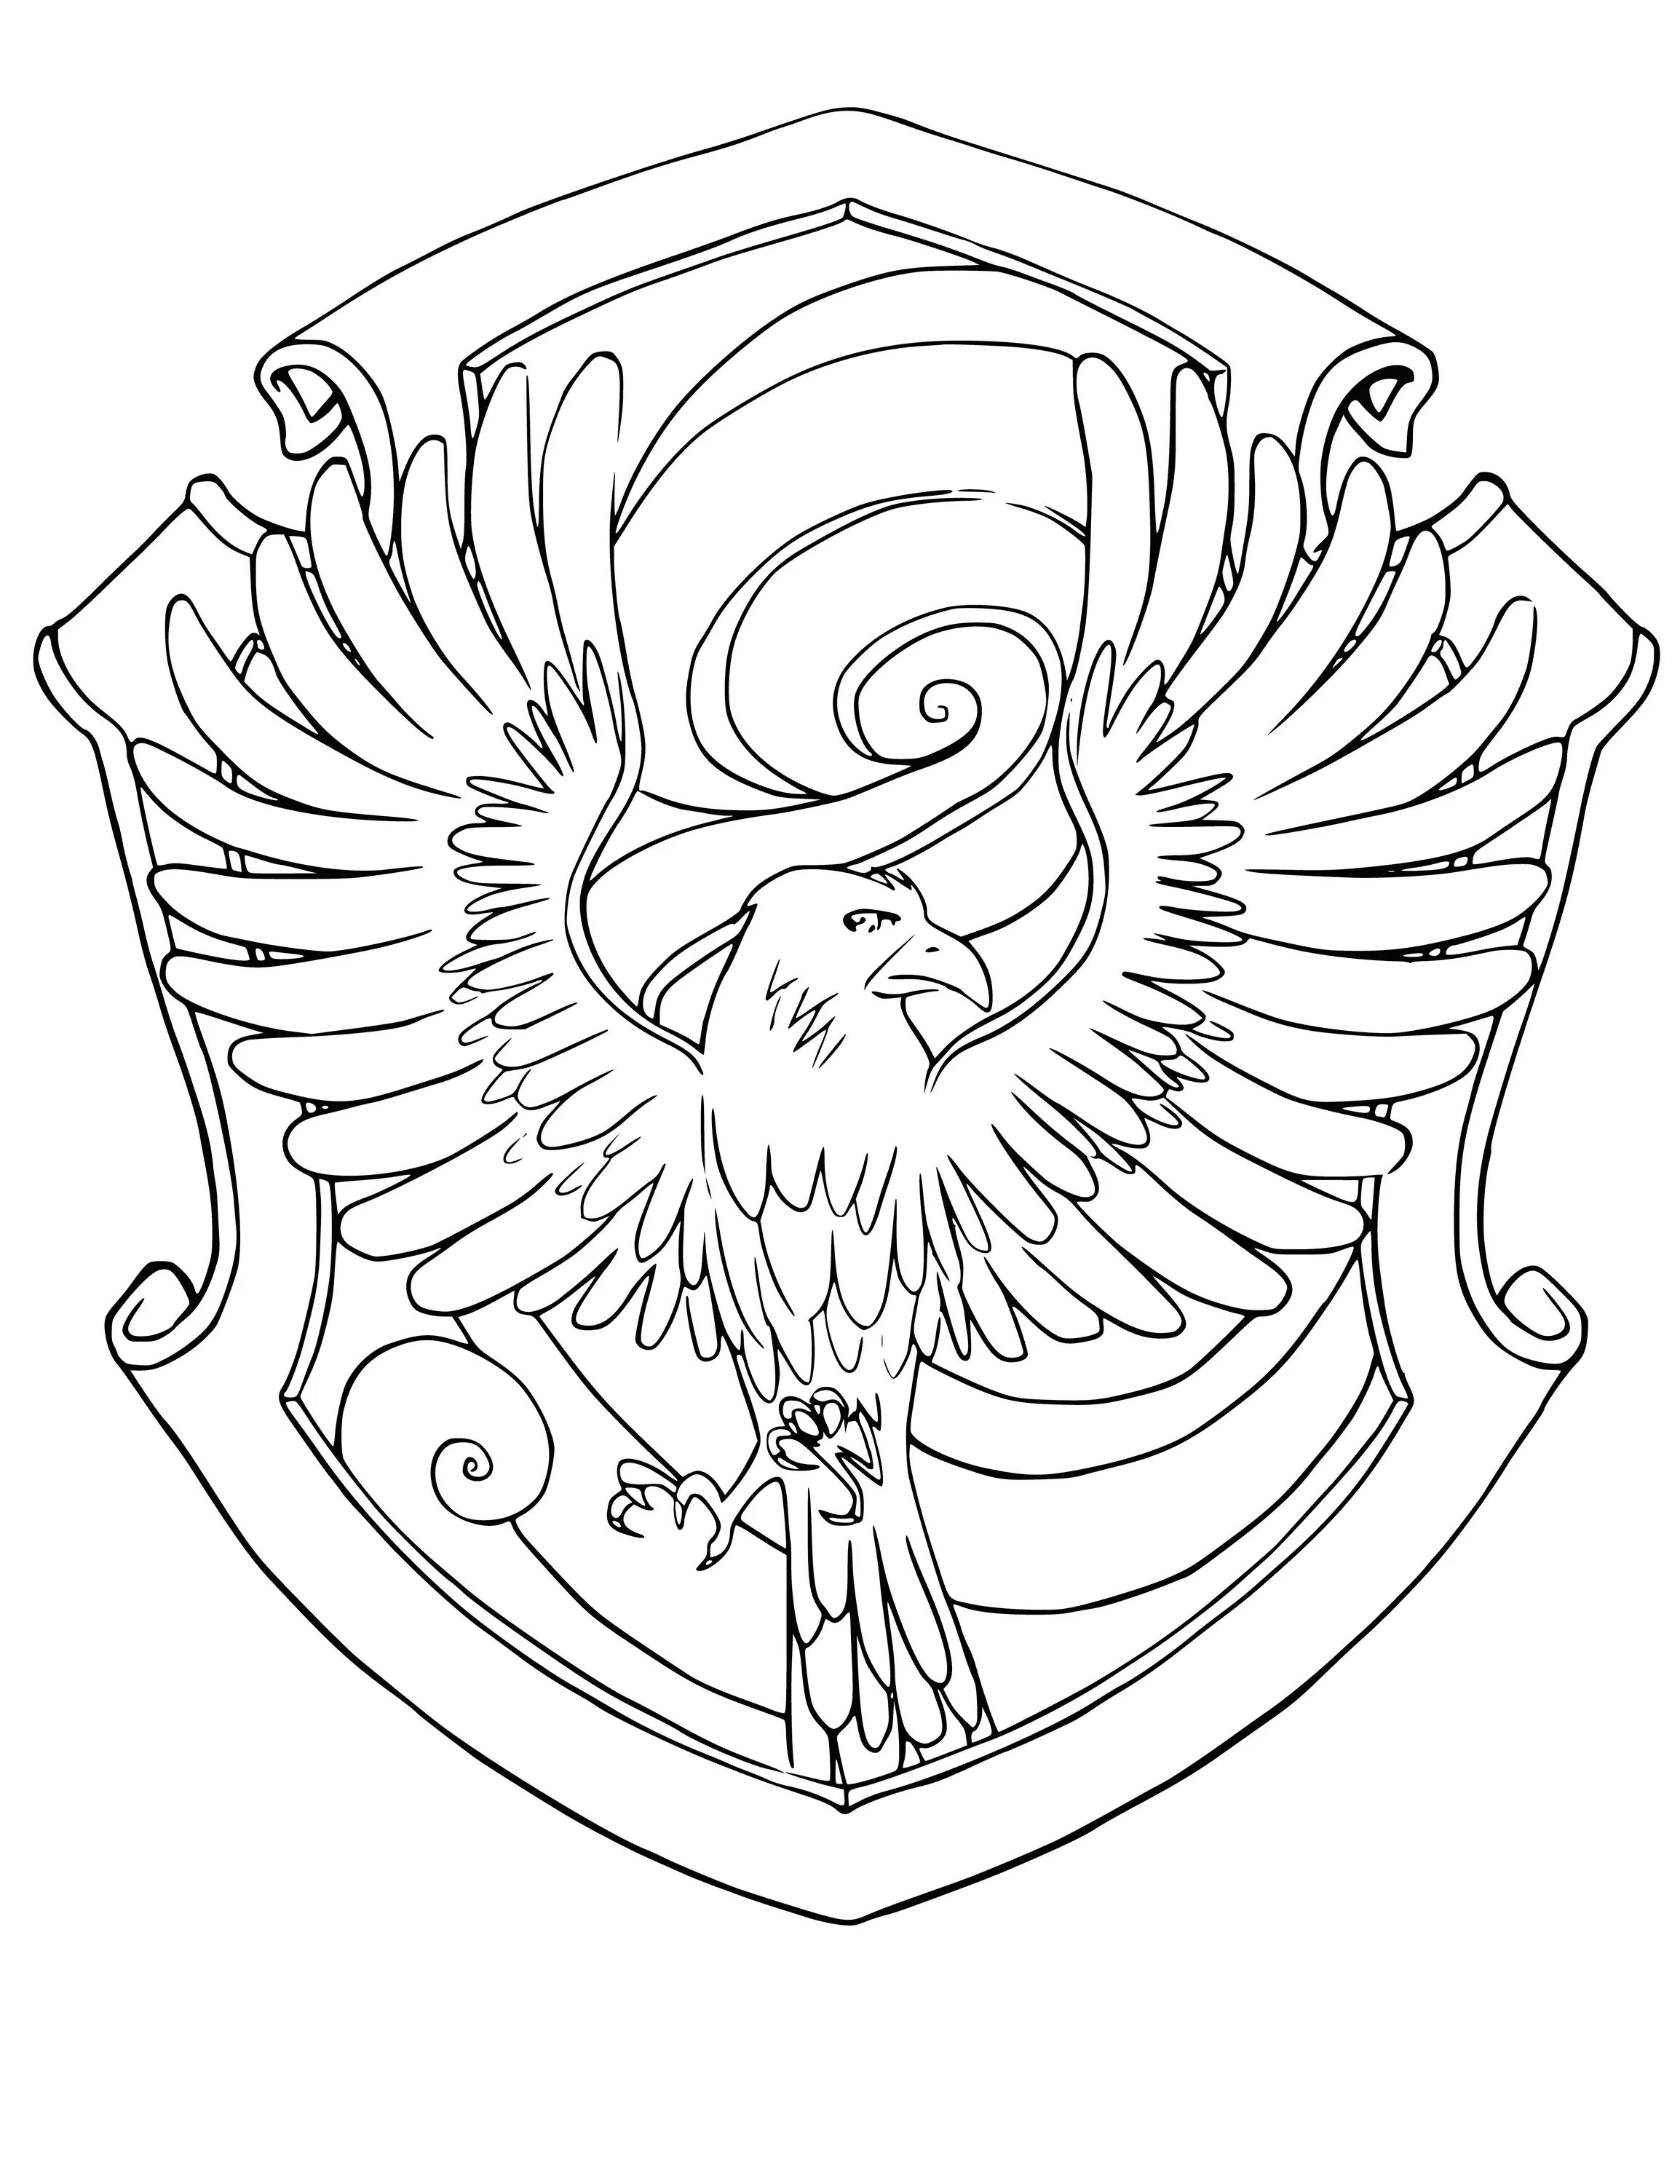 Adorable coat of arms of Ravenclaw coloring book